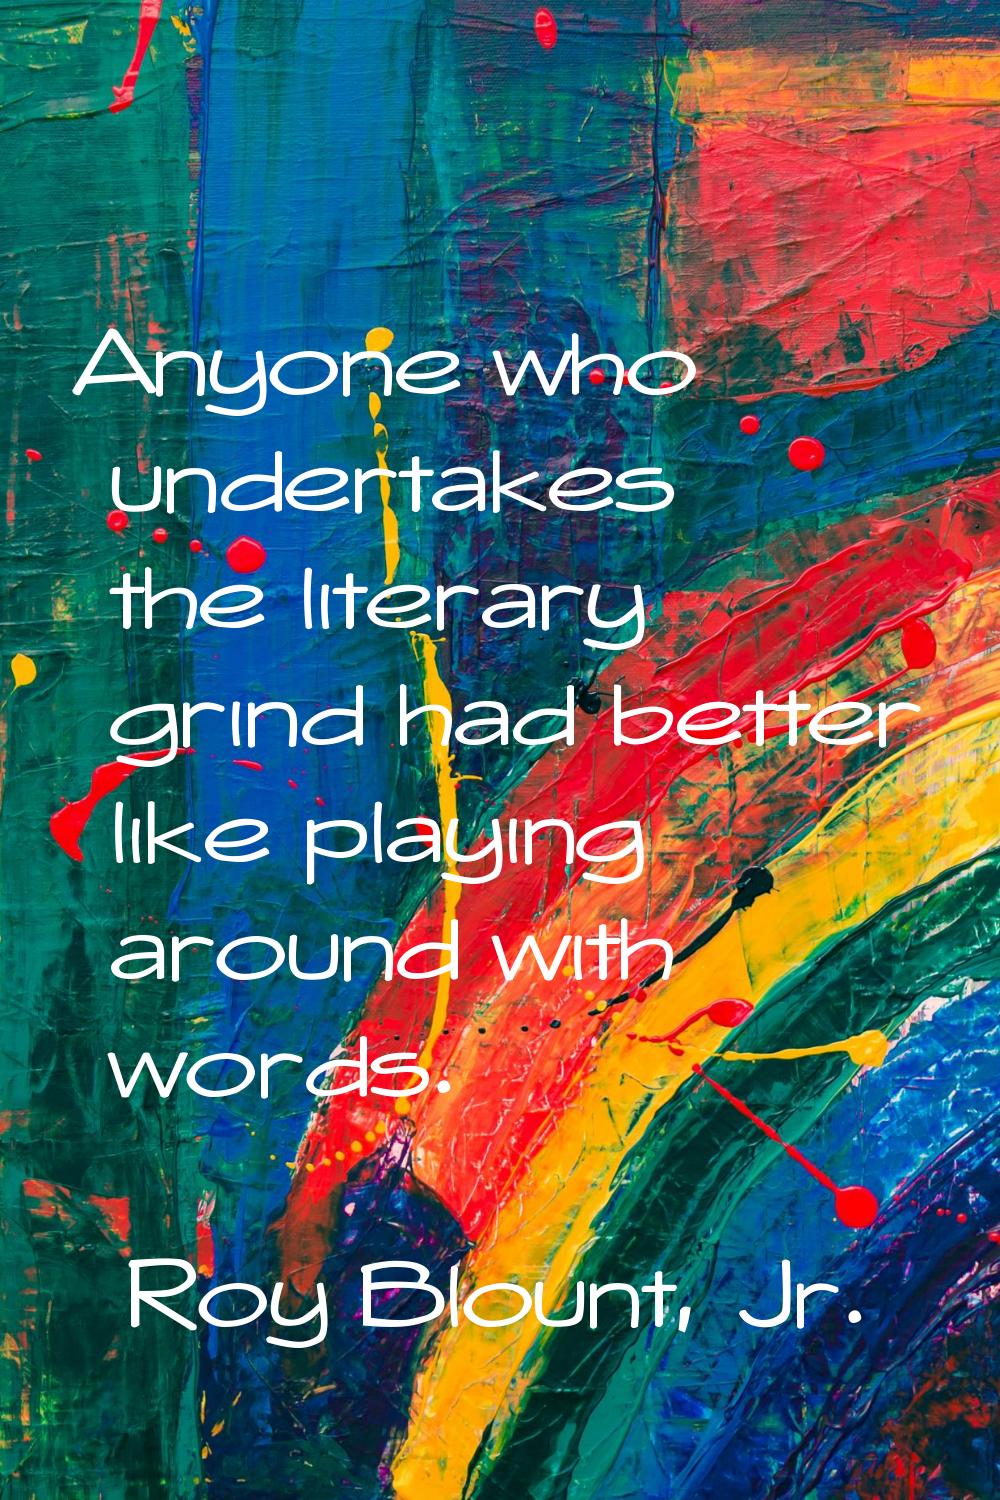 Anyone who undertakes the literary grind had better like playing around with words.